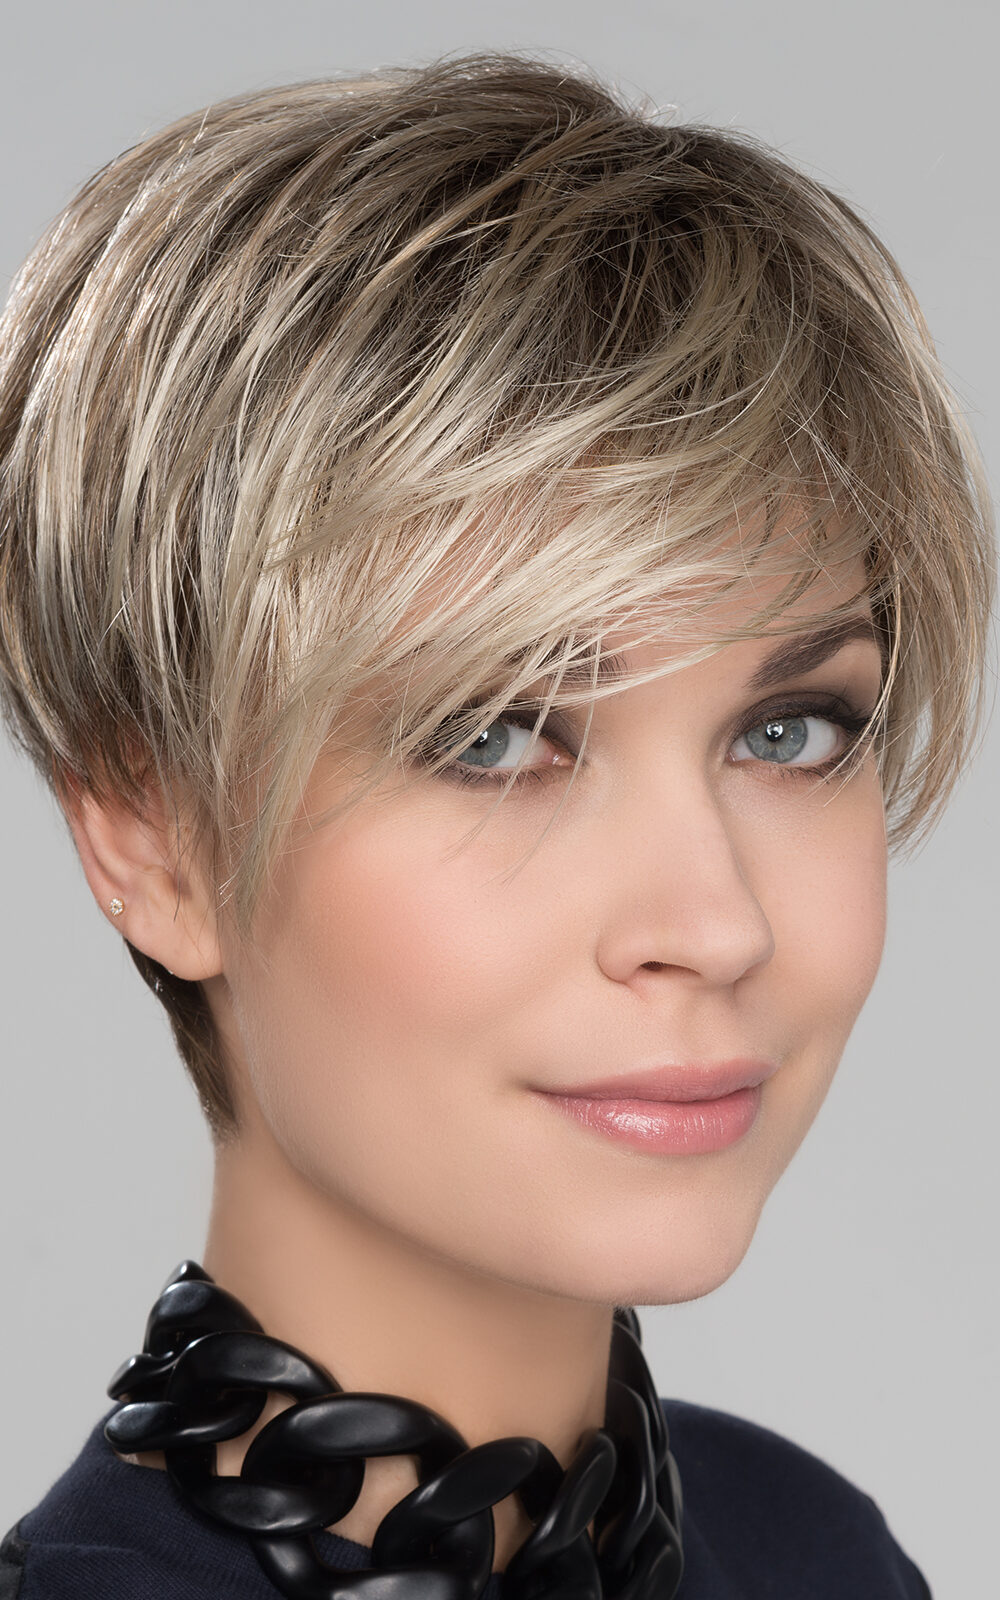 Amazing beautiful asymmetric wig which has the wow factor with its sweeping side fringe and choppy layers